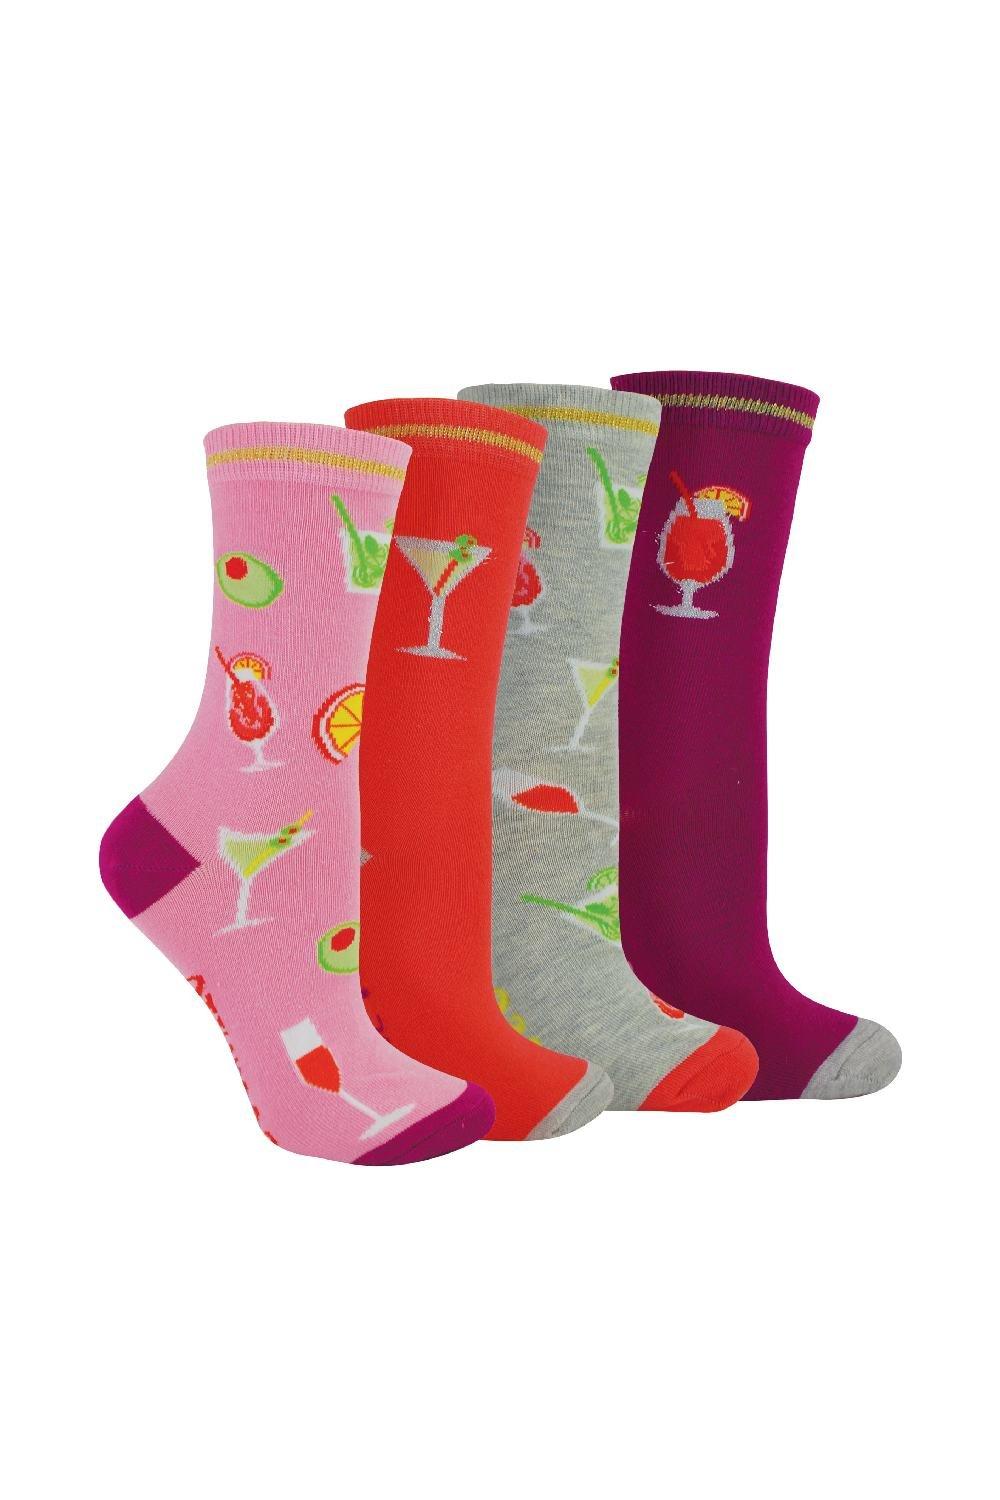 4 Pairs Soft Cotton Cocktail Design Novelty Socks in a Gift Box